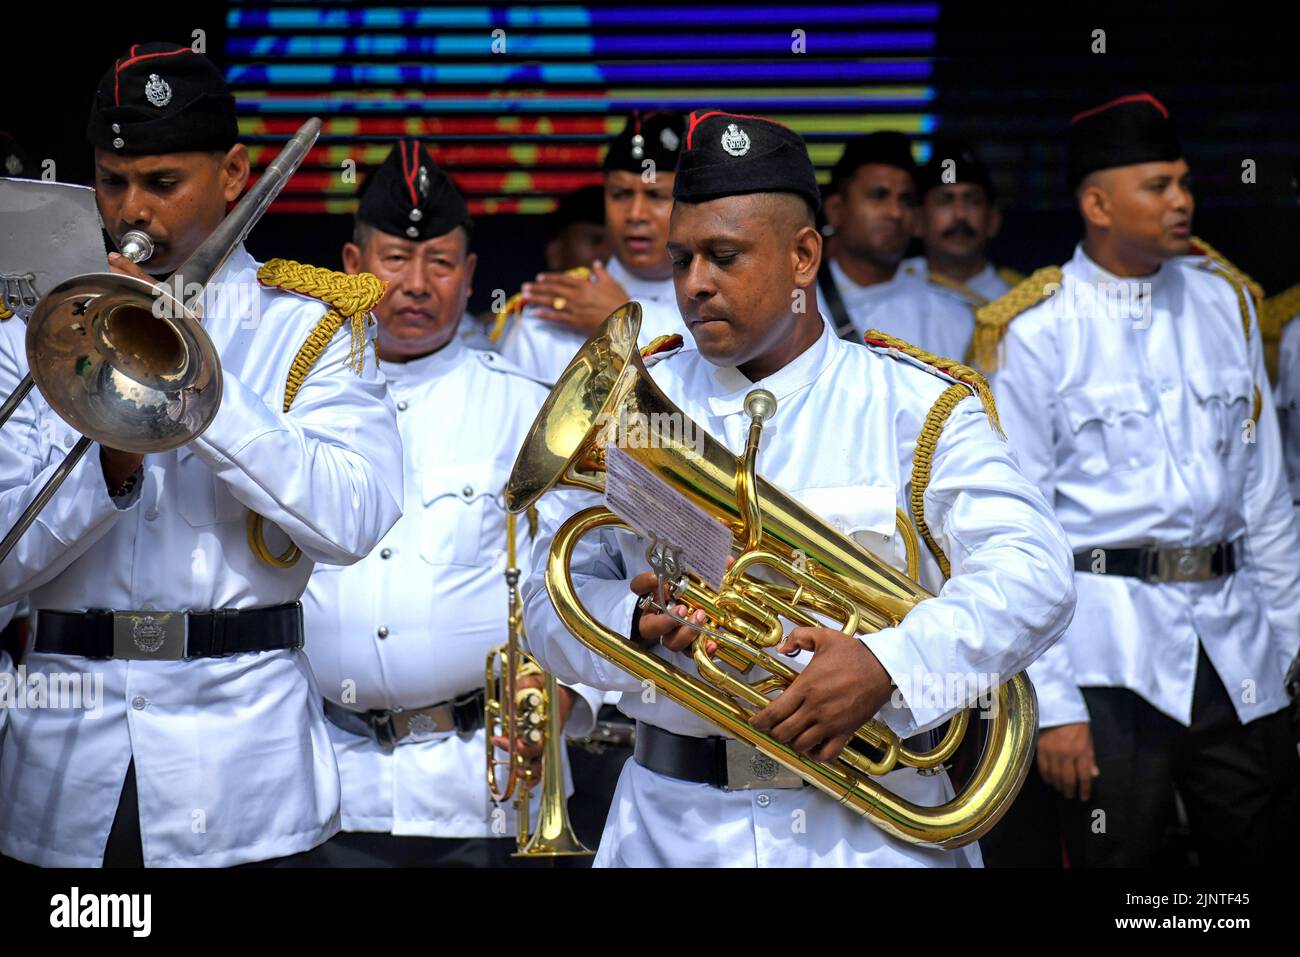 A police band seen preparing during the Final Dress Rehearsal . India prepares to celebrate the 75th Independence day on 15th August 2022 as part of the Azadi Ka Amrit Mahotsav celebration. Stock Photo